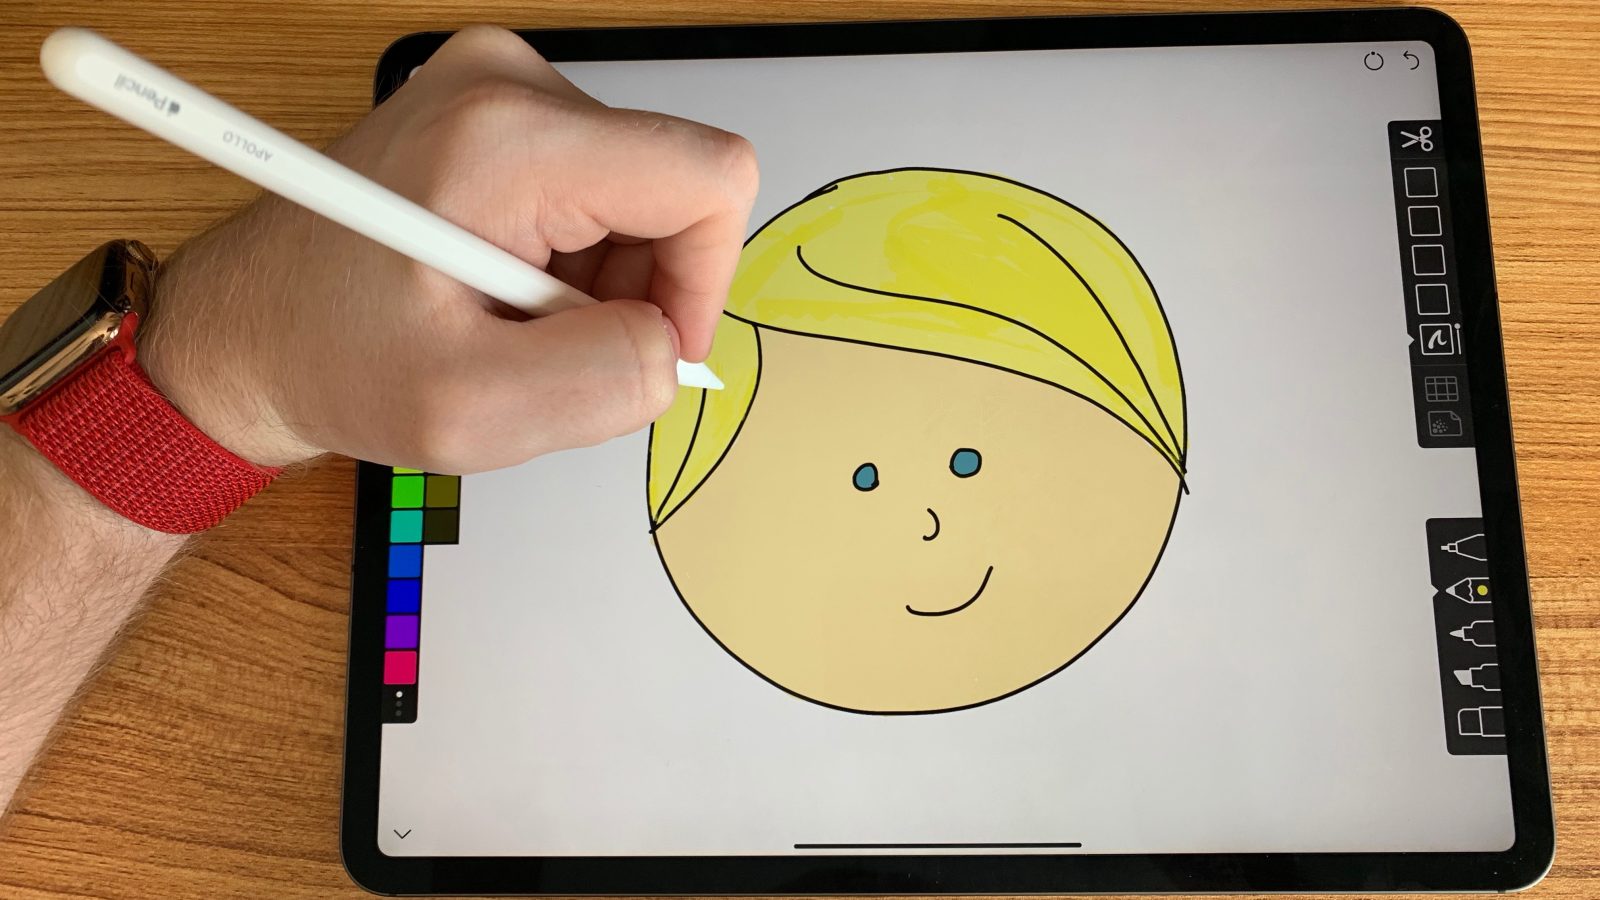 iPad Pro drawing app Linea Sketch updated for Apple Pencil - 9to5Mac